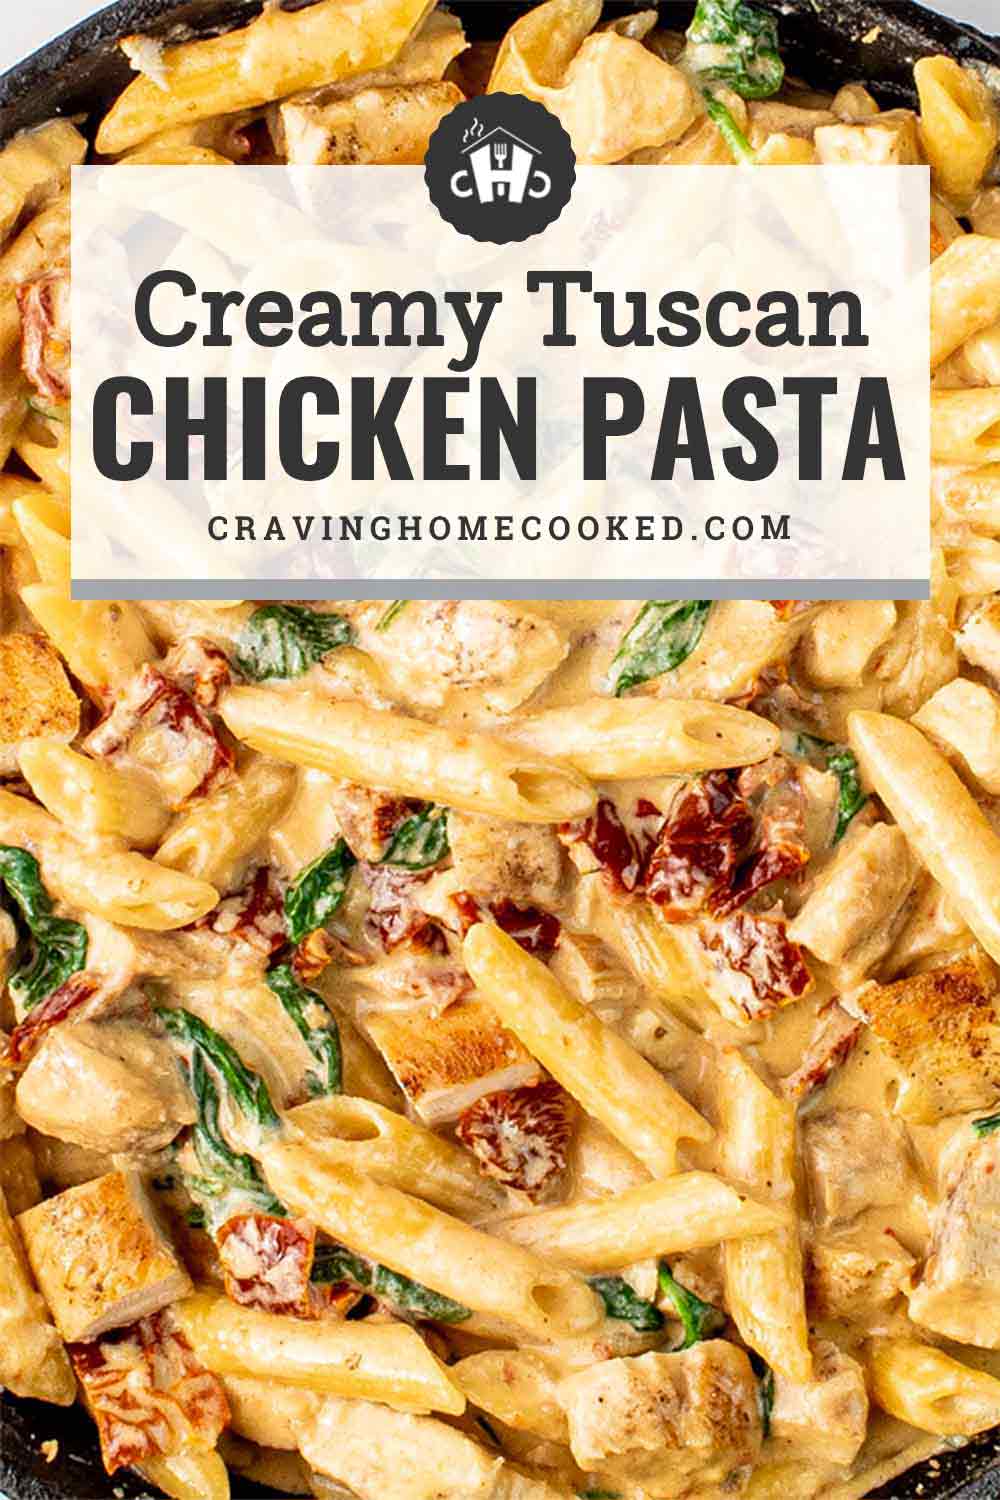 Creamy Tuscan Chicken Pasta - Craving Home Cooked